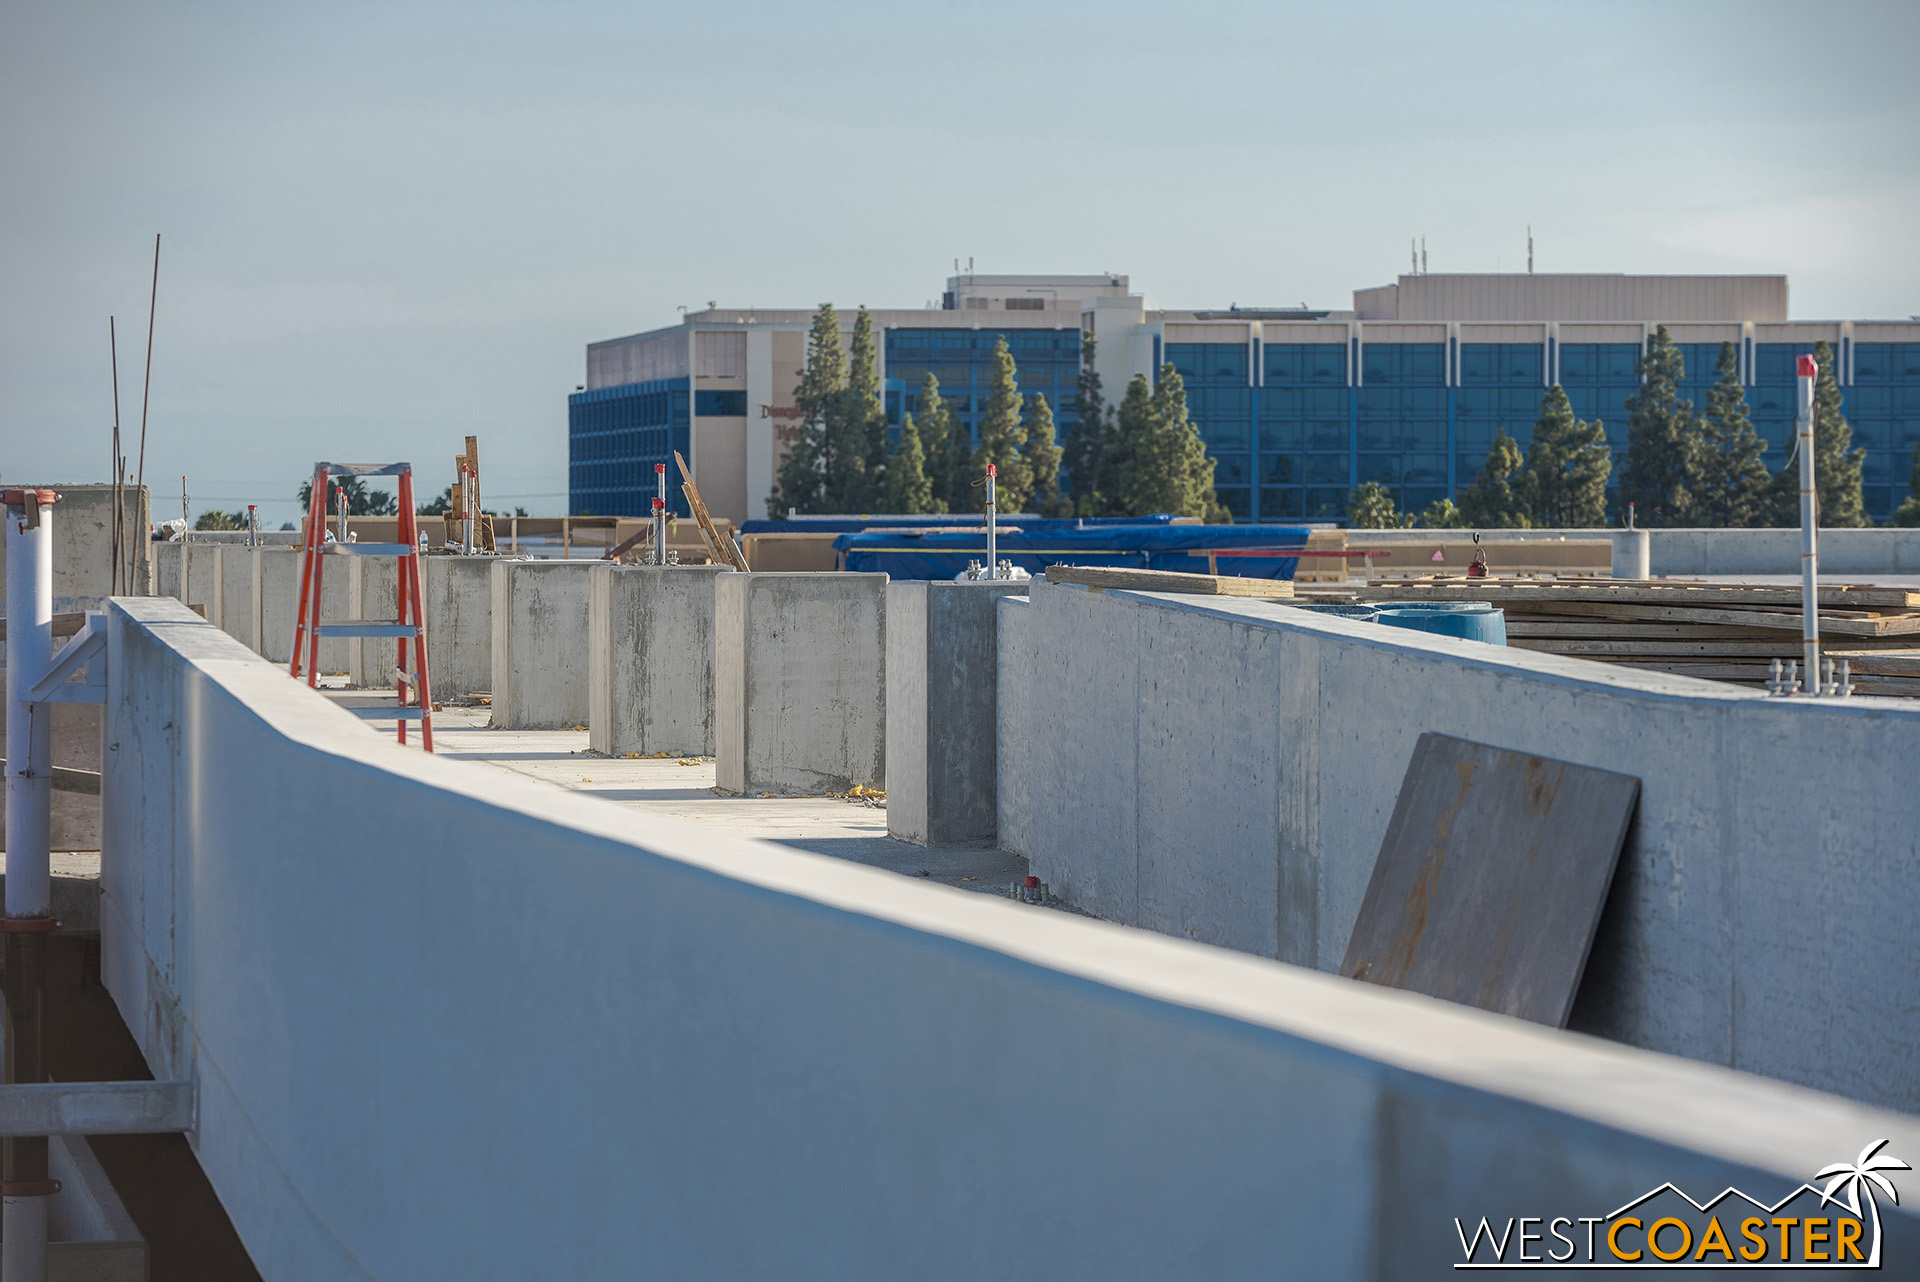  Gazing across the top level, these concrete plinths have been cast as part of pedestrian barrier protection. 